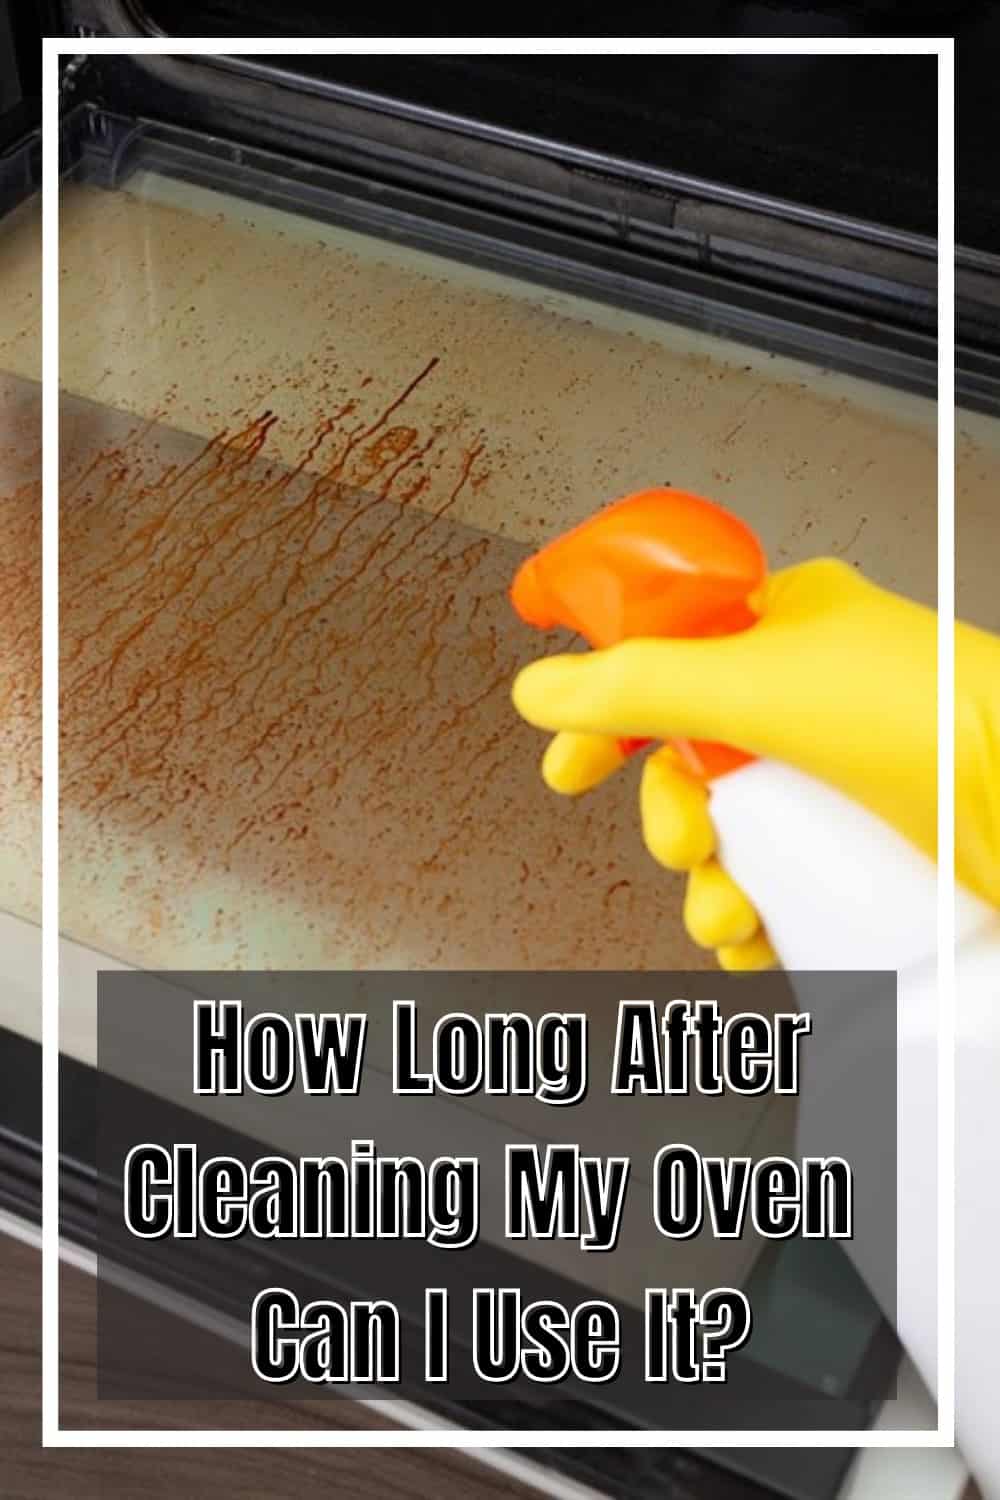 Do you have to wait after using oven cleaner?